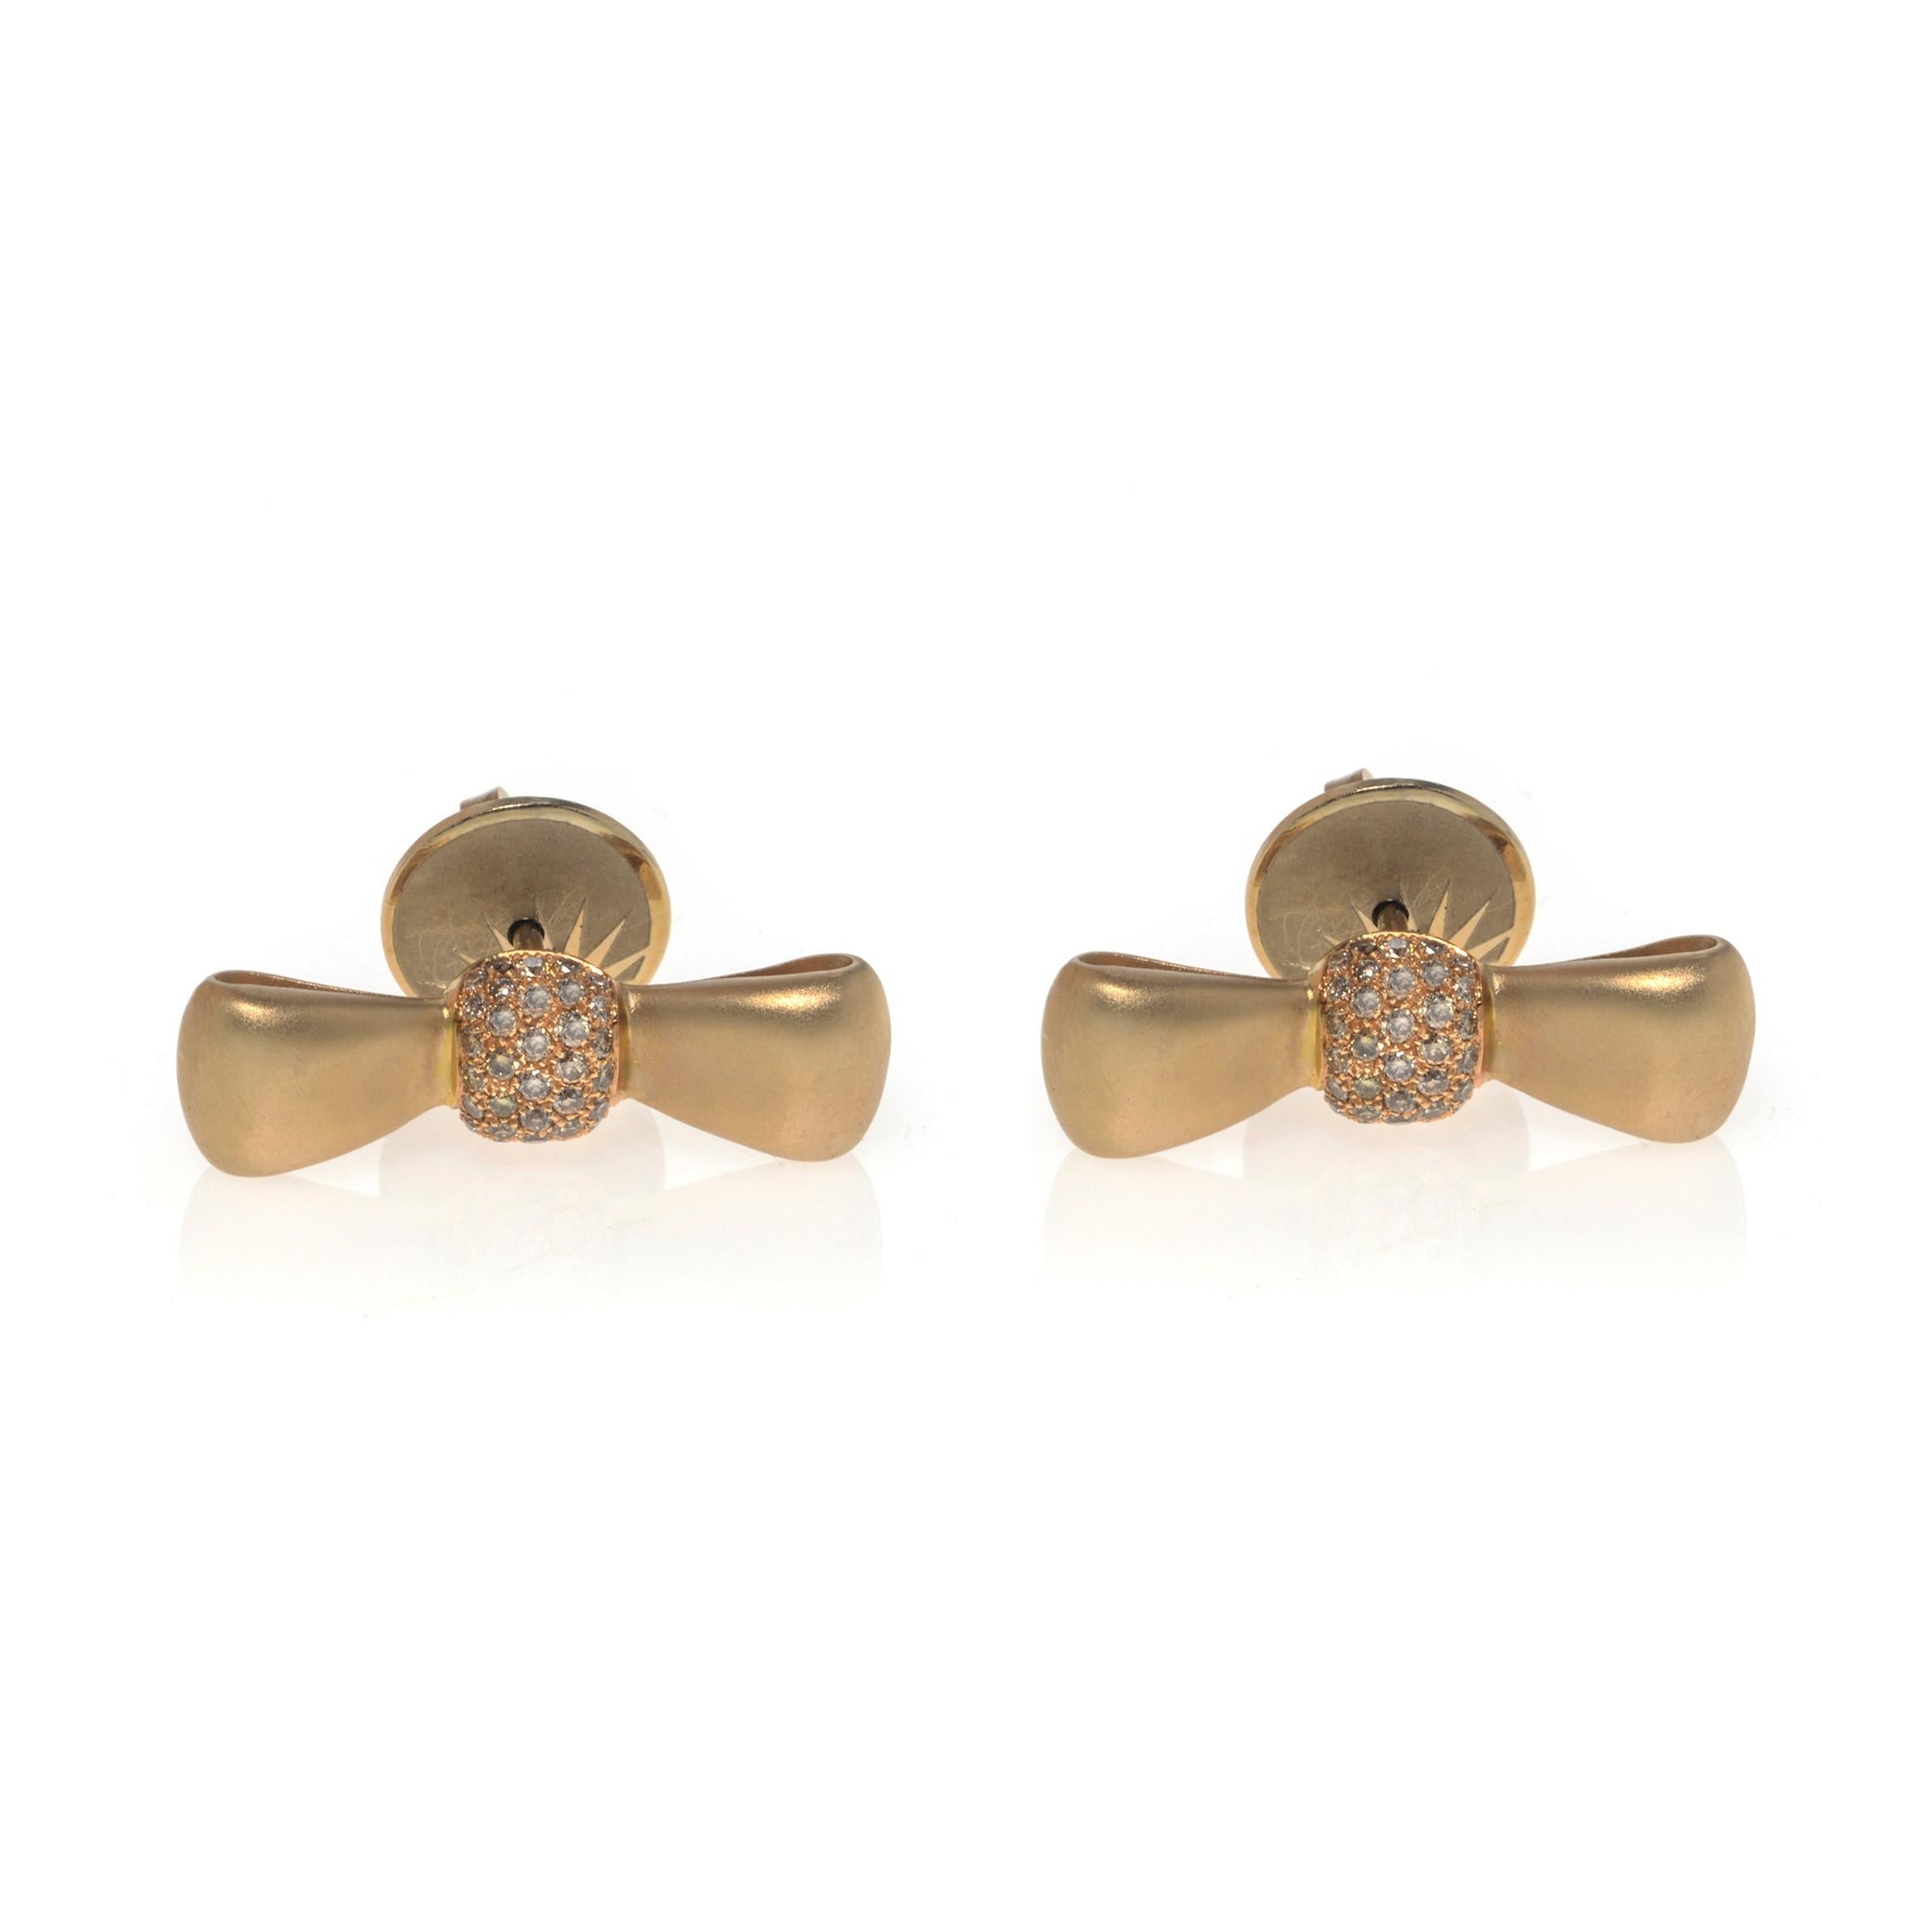 These beautiful bow stud earrings by Luca Carati are crafted in 18k yellow gold. These earrings feature pave set natural brown diamonds weighing 0.37cttw. Secured with pushback post. Earring size: 22x6mm. Comes with a box and a certificate. 